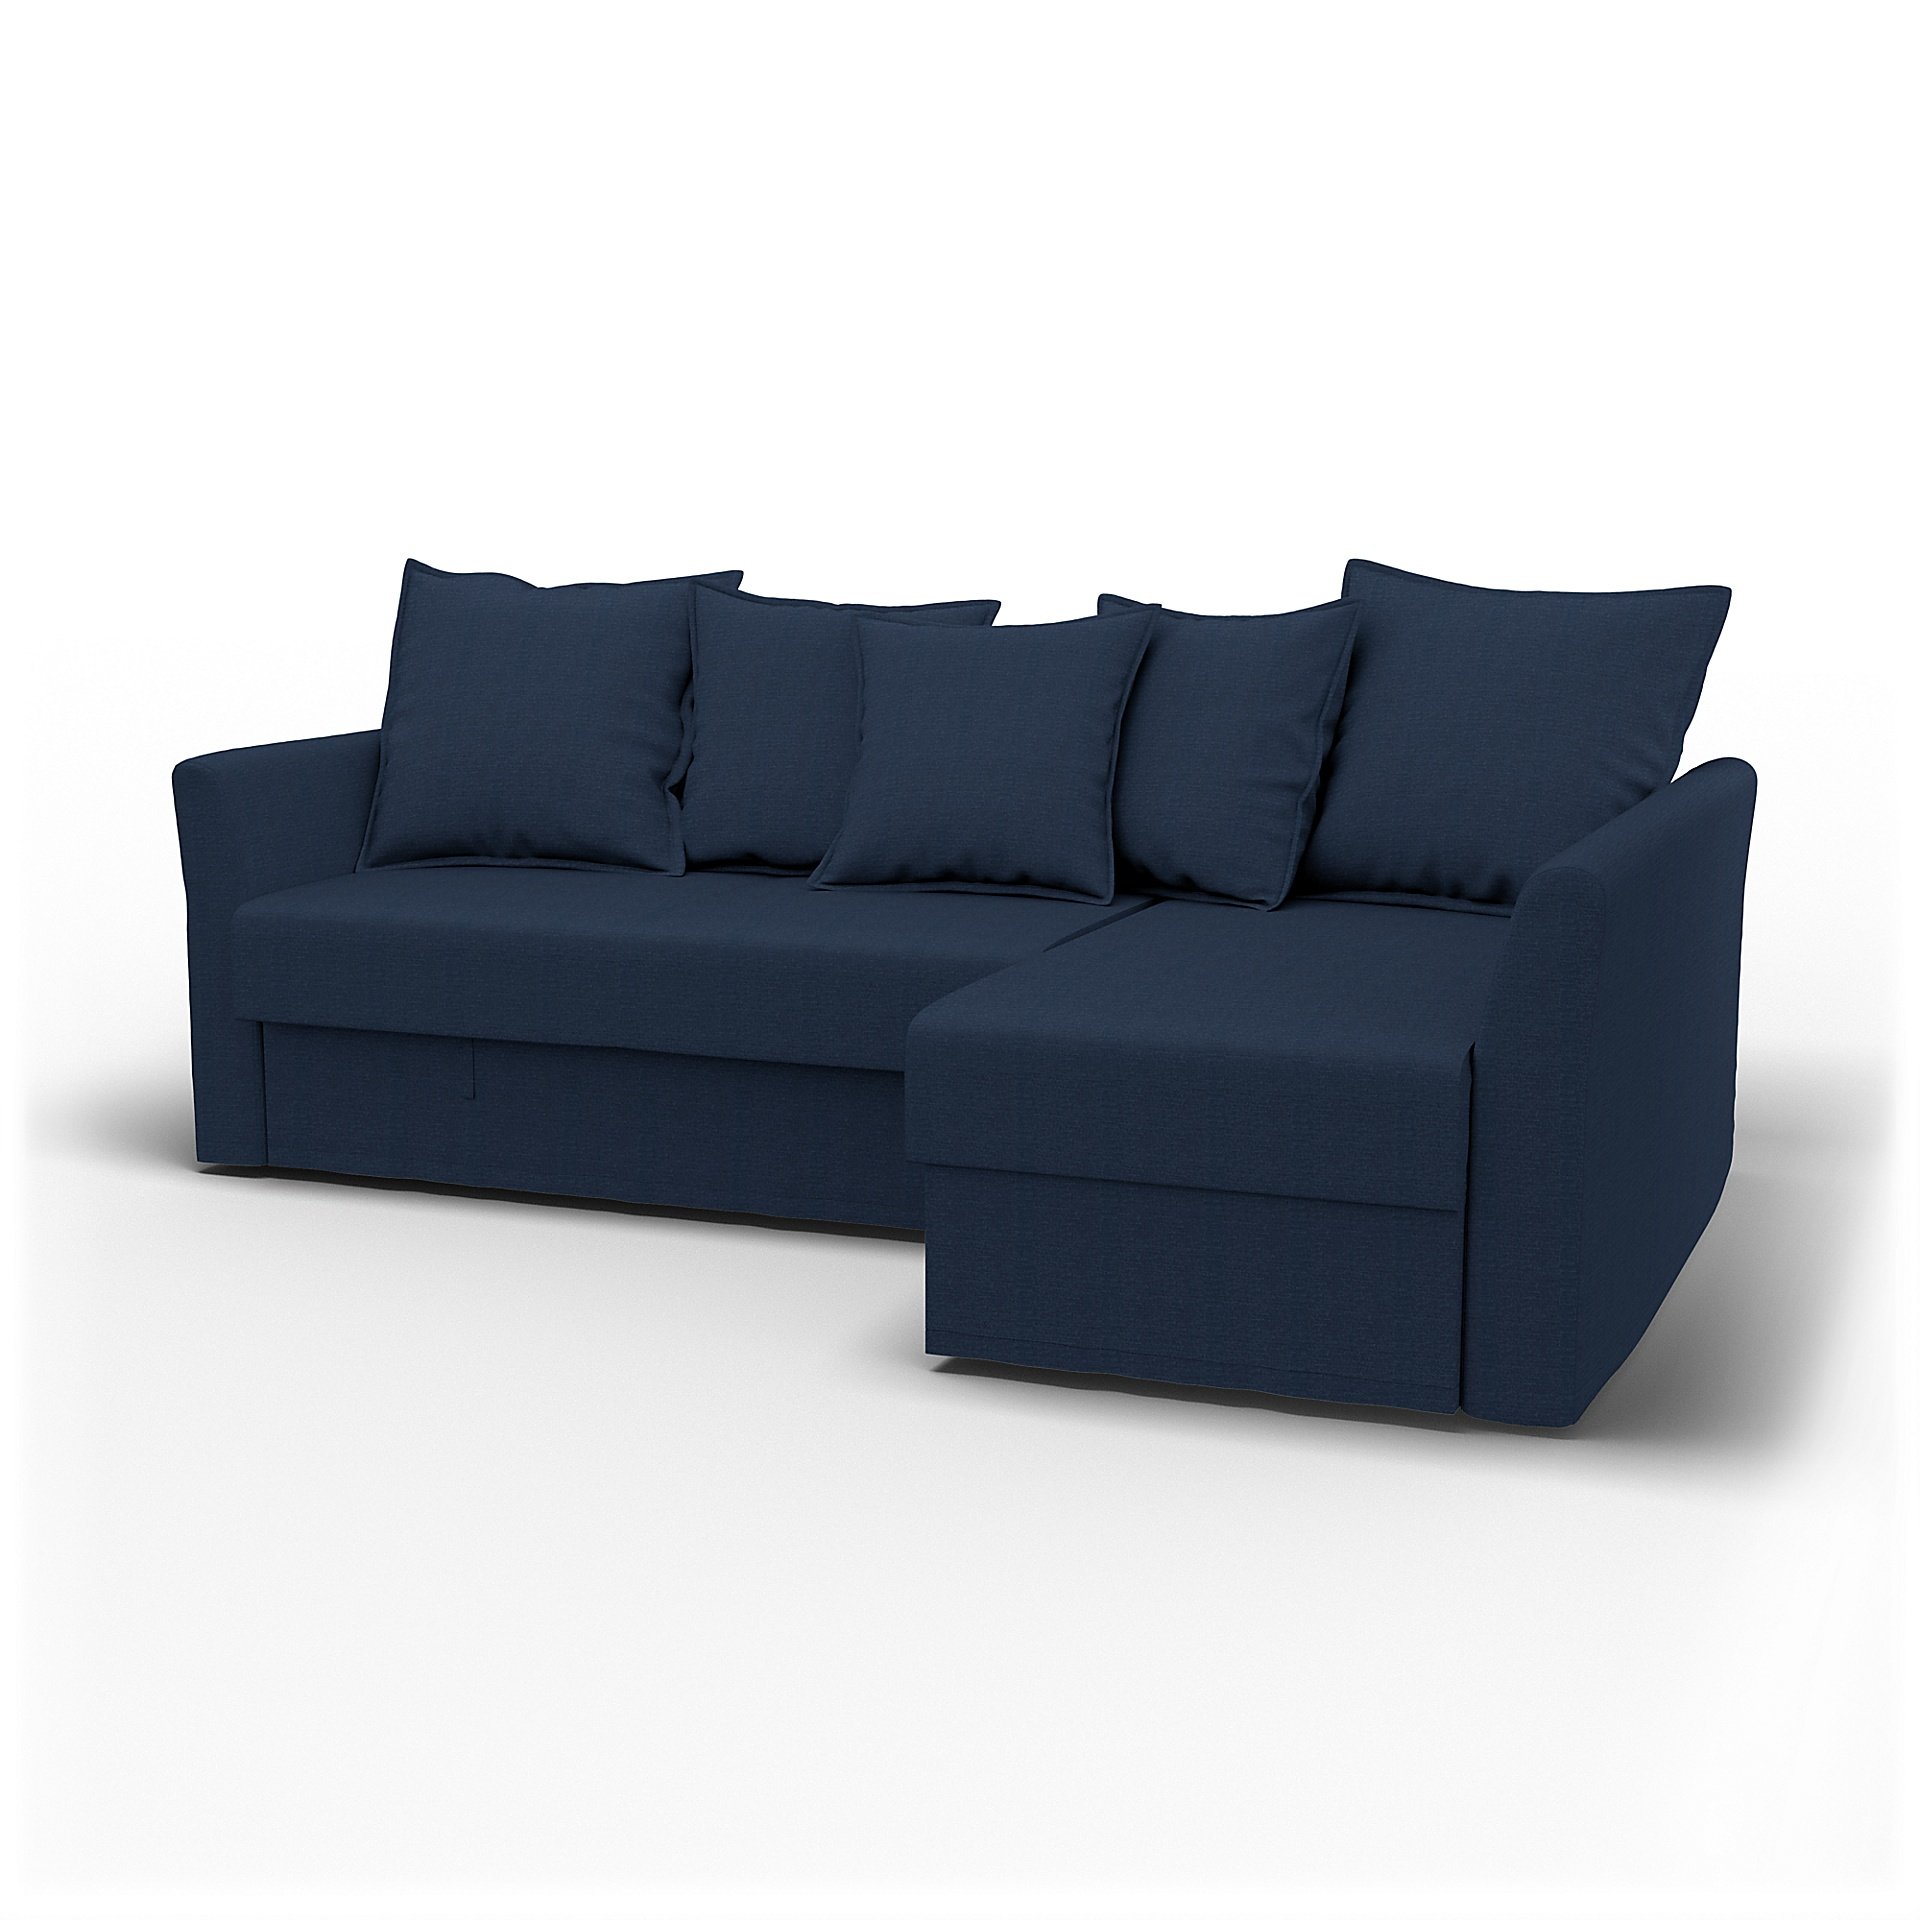 IKEA - Holmsund Sofabed with Chaiselongue, Navy Blue, Linen - Bemz